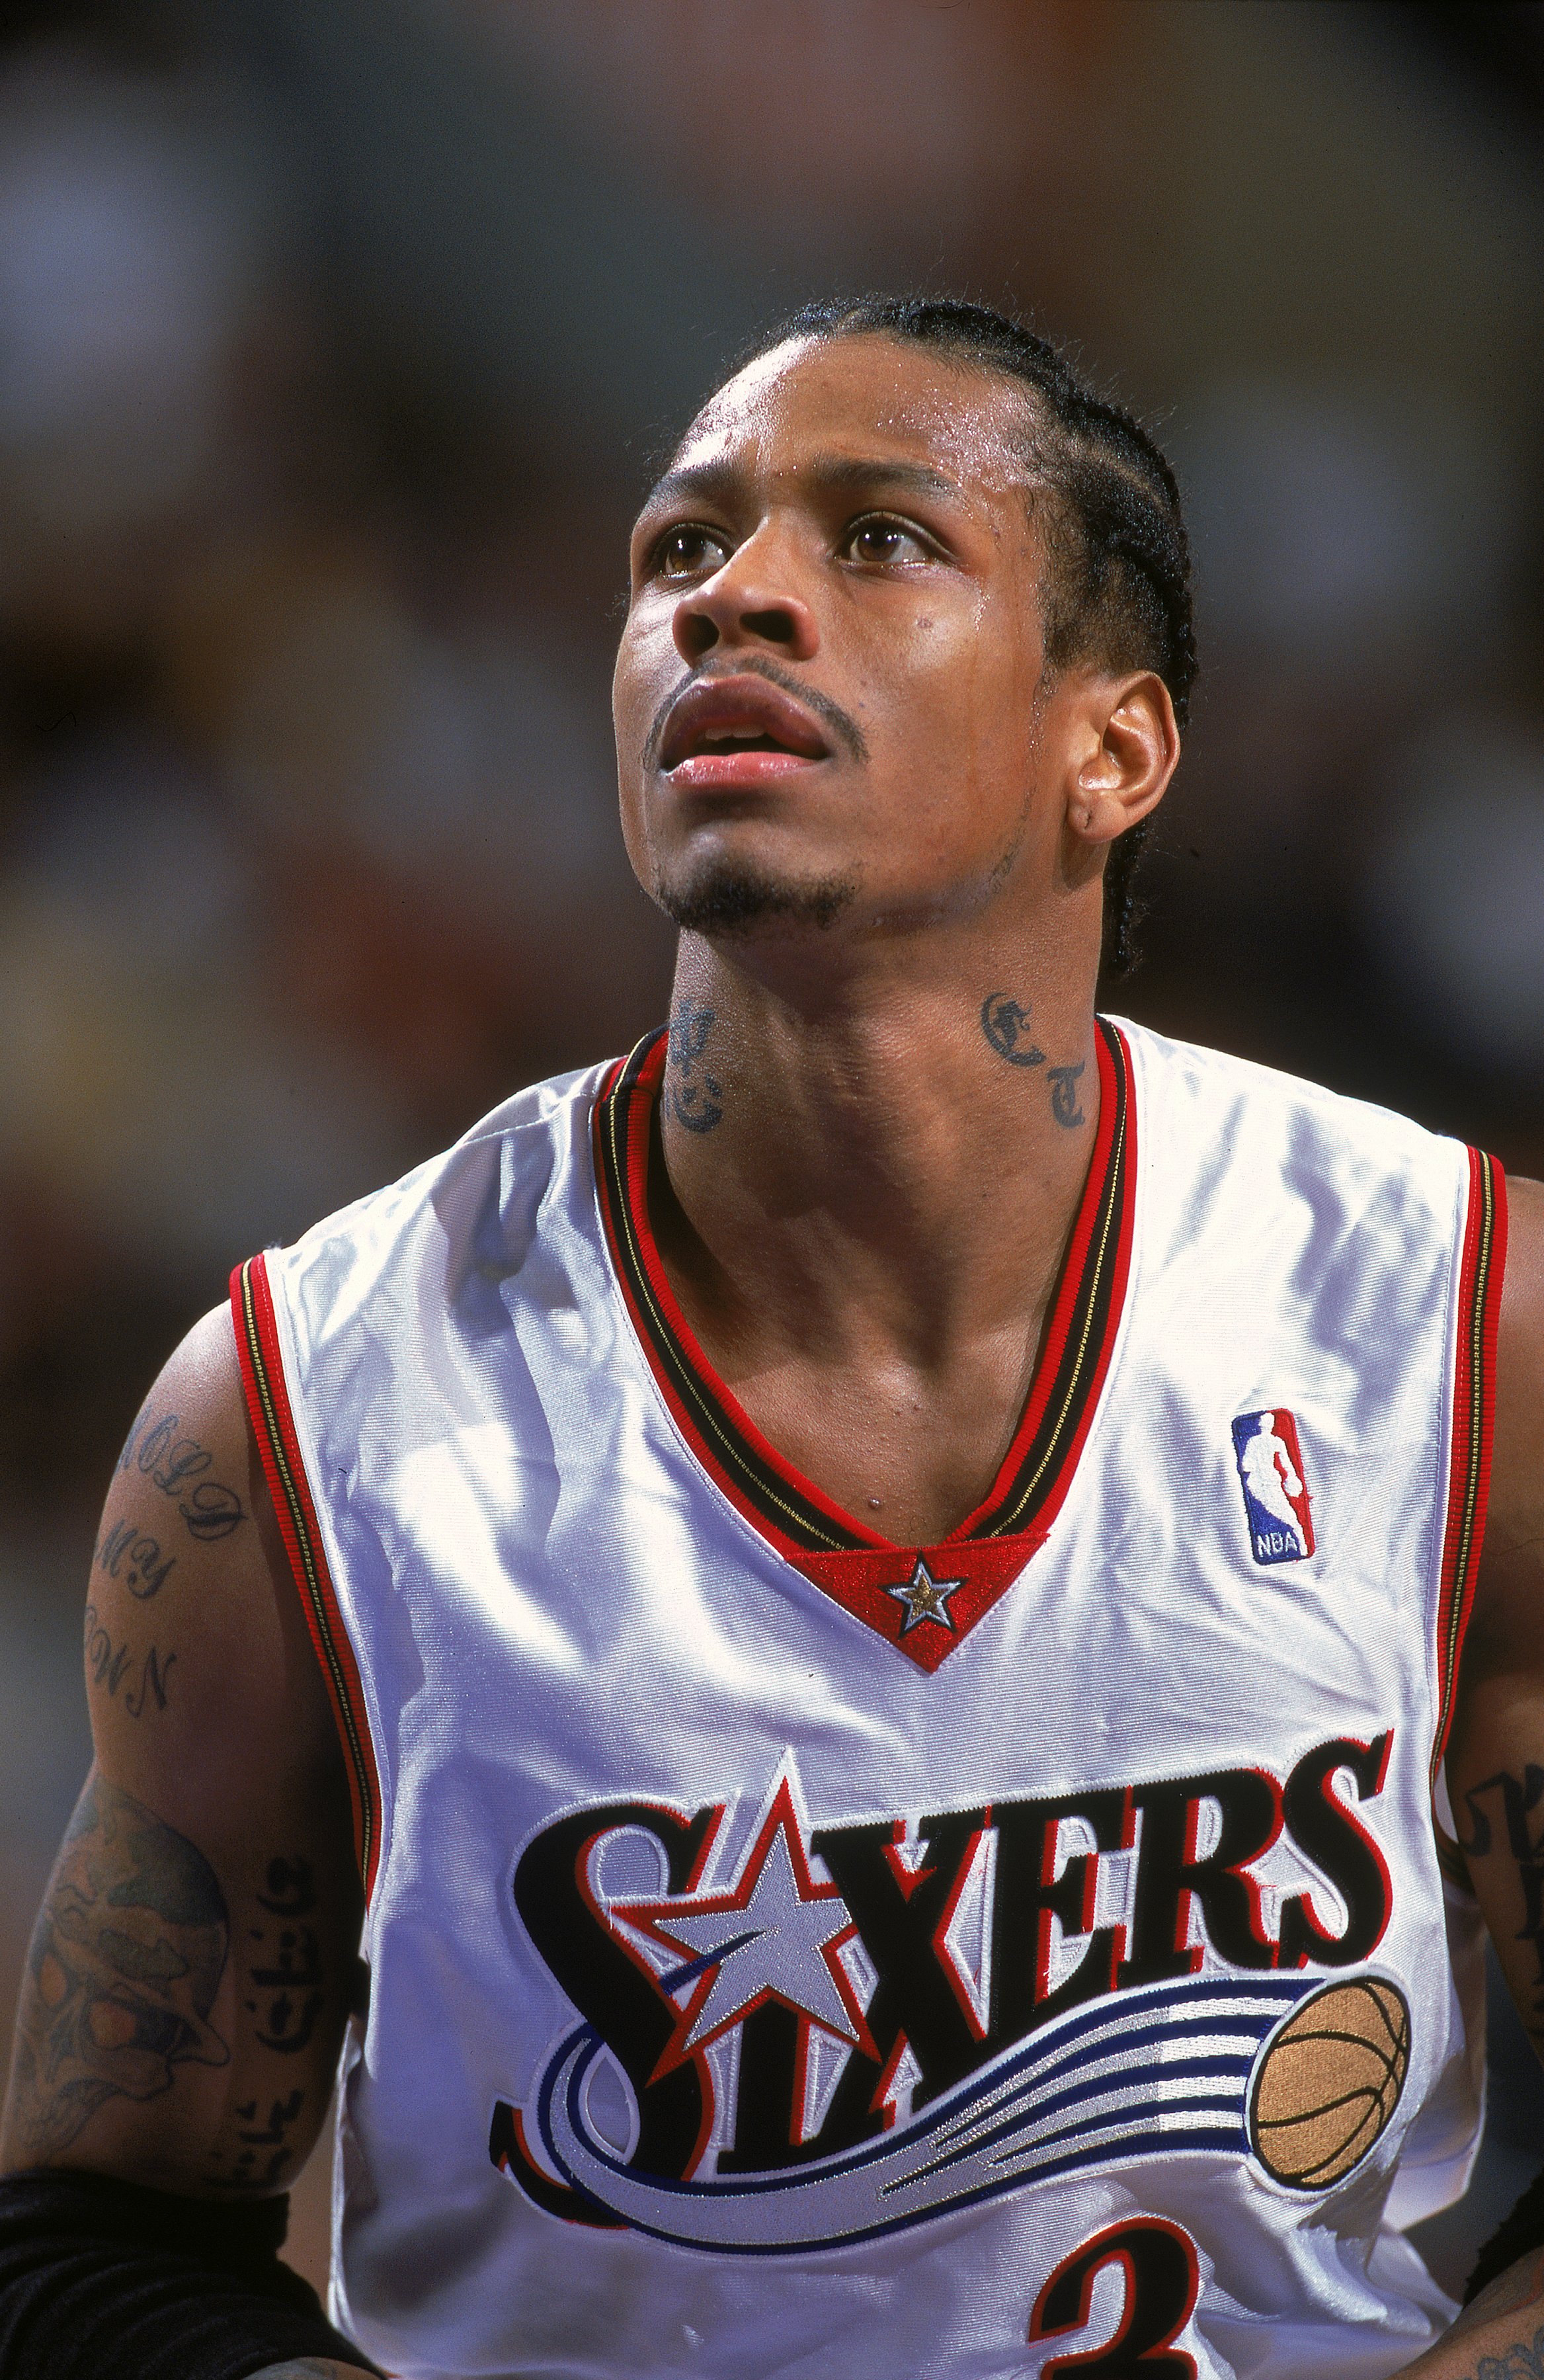 11 Dec 2000:  A close up of Allen Iverson #3 of the Philadelphia 76ers gets ready to shoot a free throw during the game against the Minnesota Timberwolves at the First Union Center in Philadelphia, Pennsylvania. The Timberwolves defeated the 76ers 96-91.